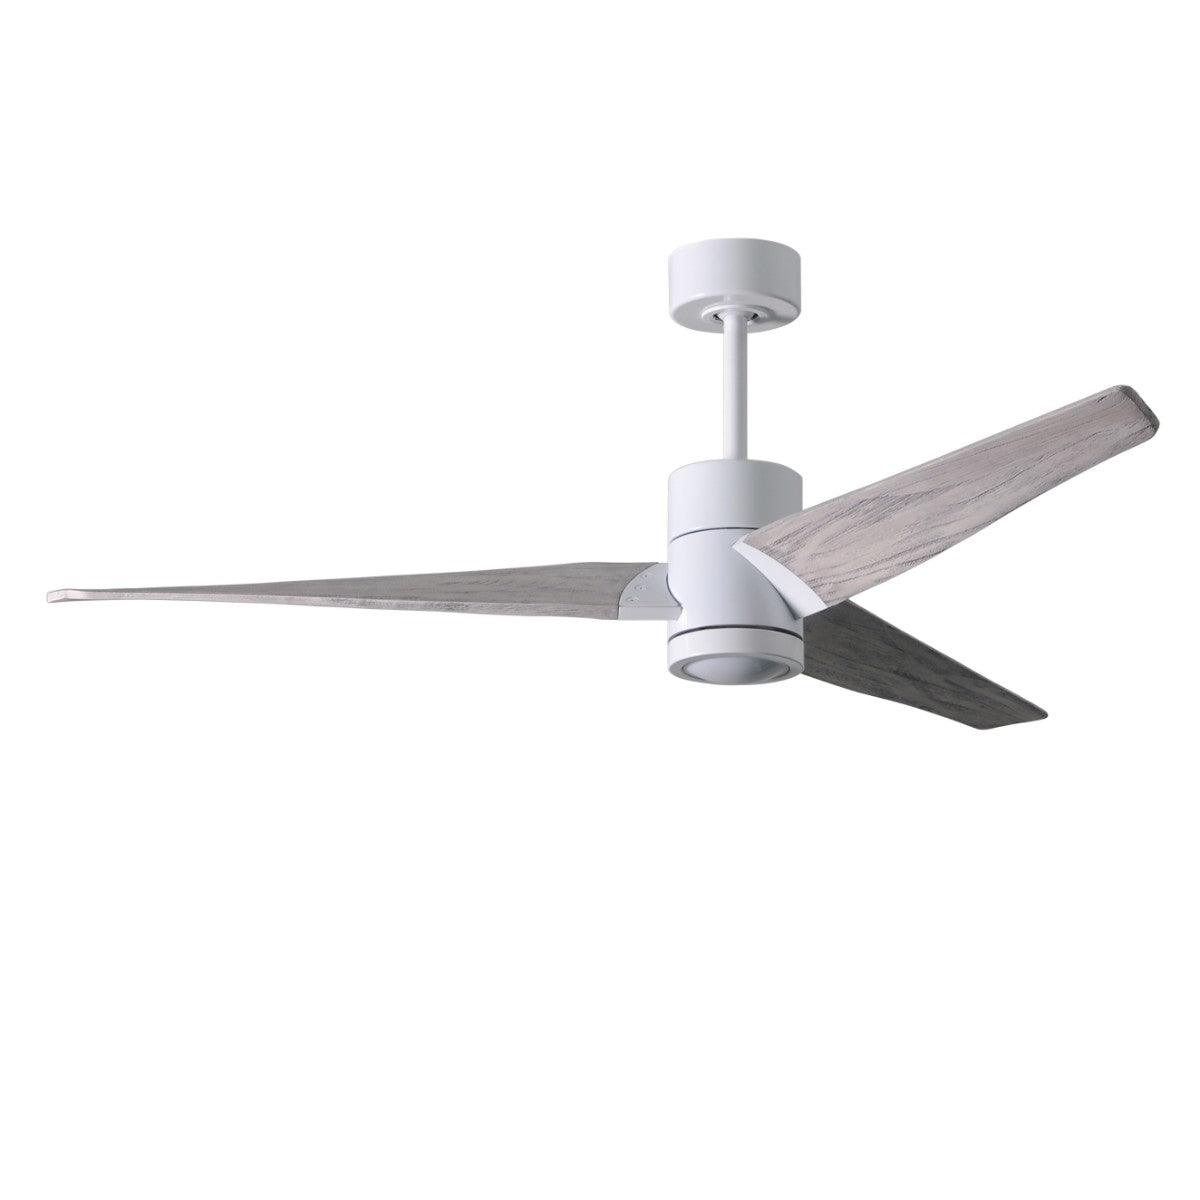 Super Janet 60 Inch Outdoor Ceiling Fan With Light, Wall And Remote Control Included